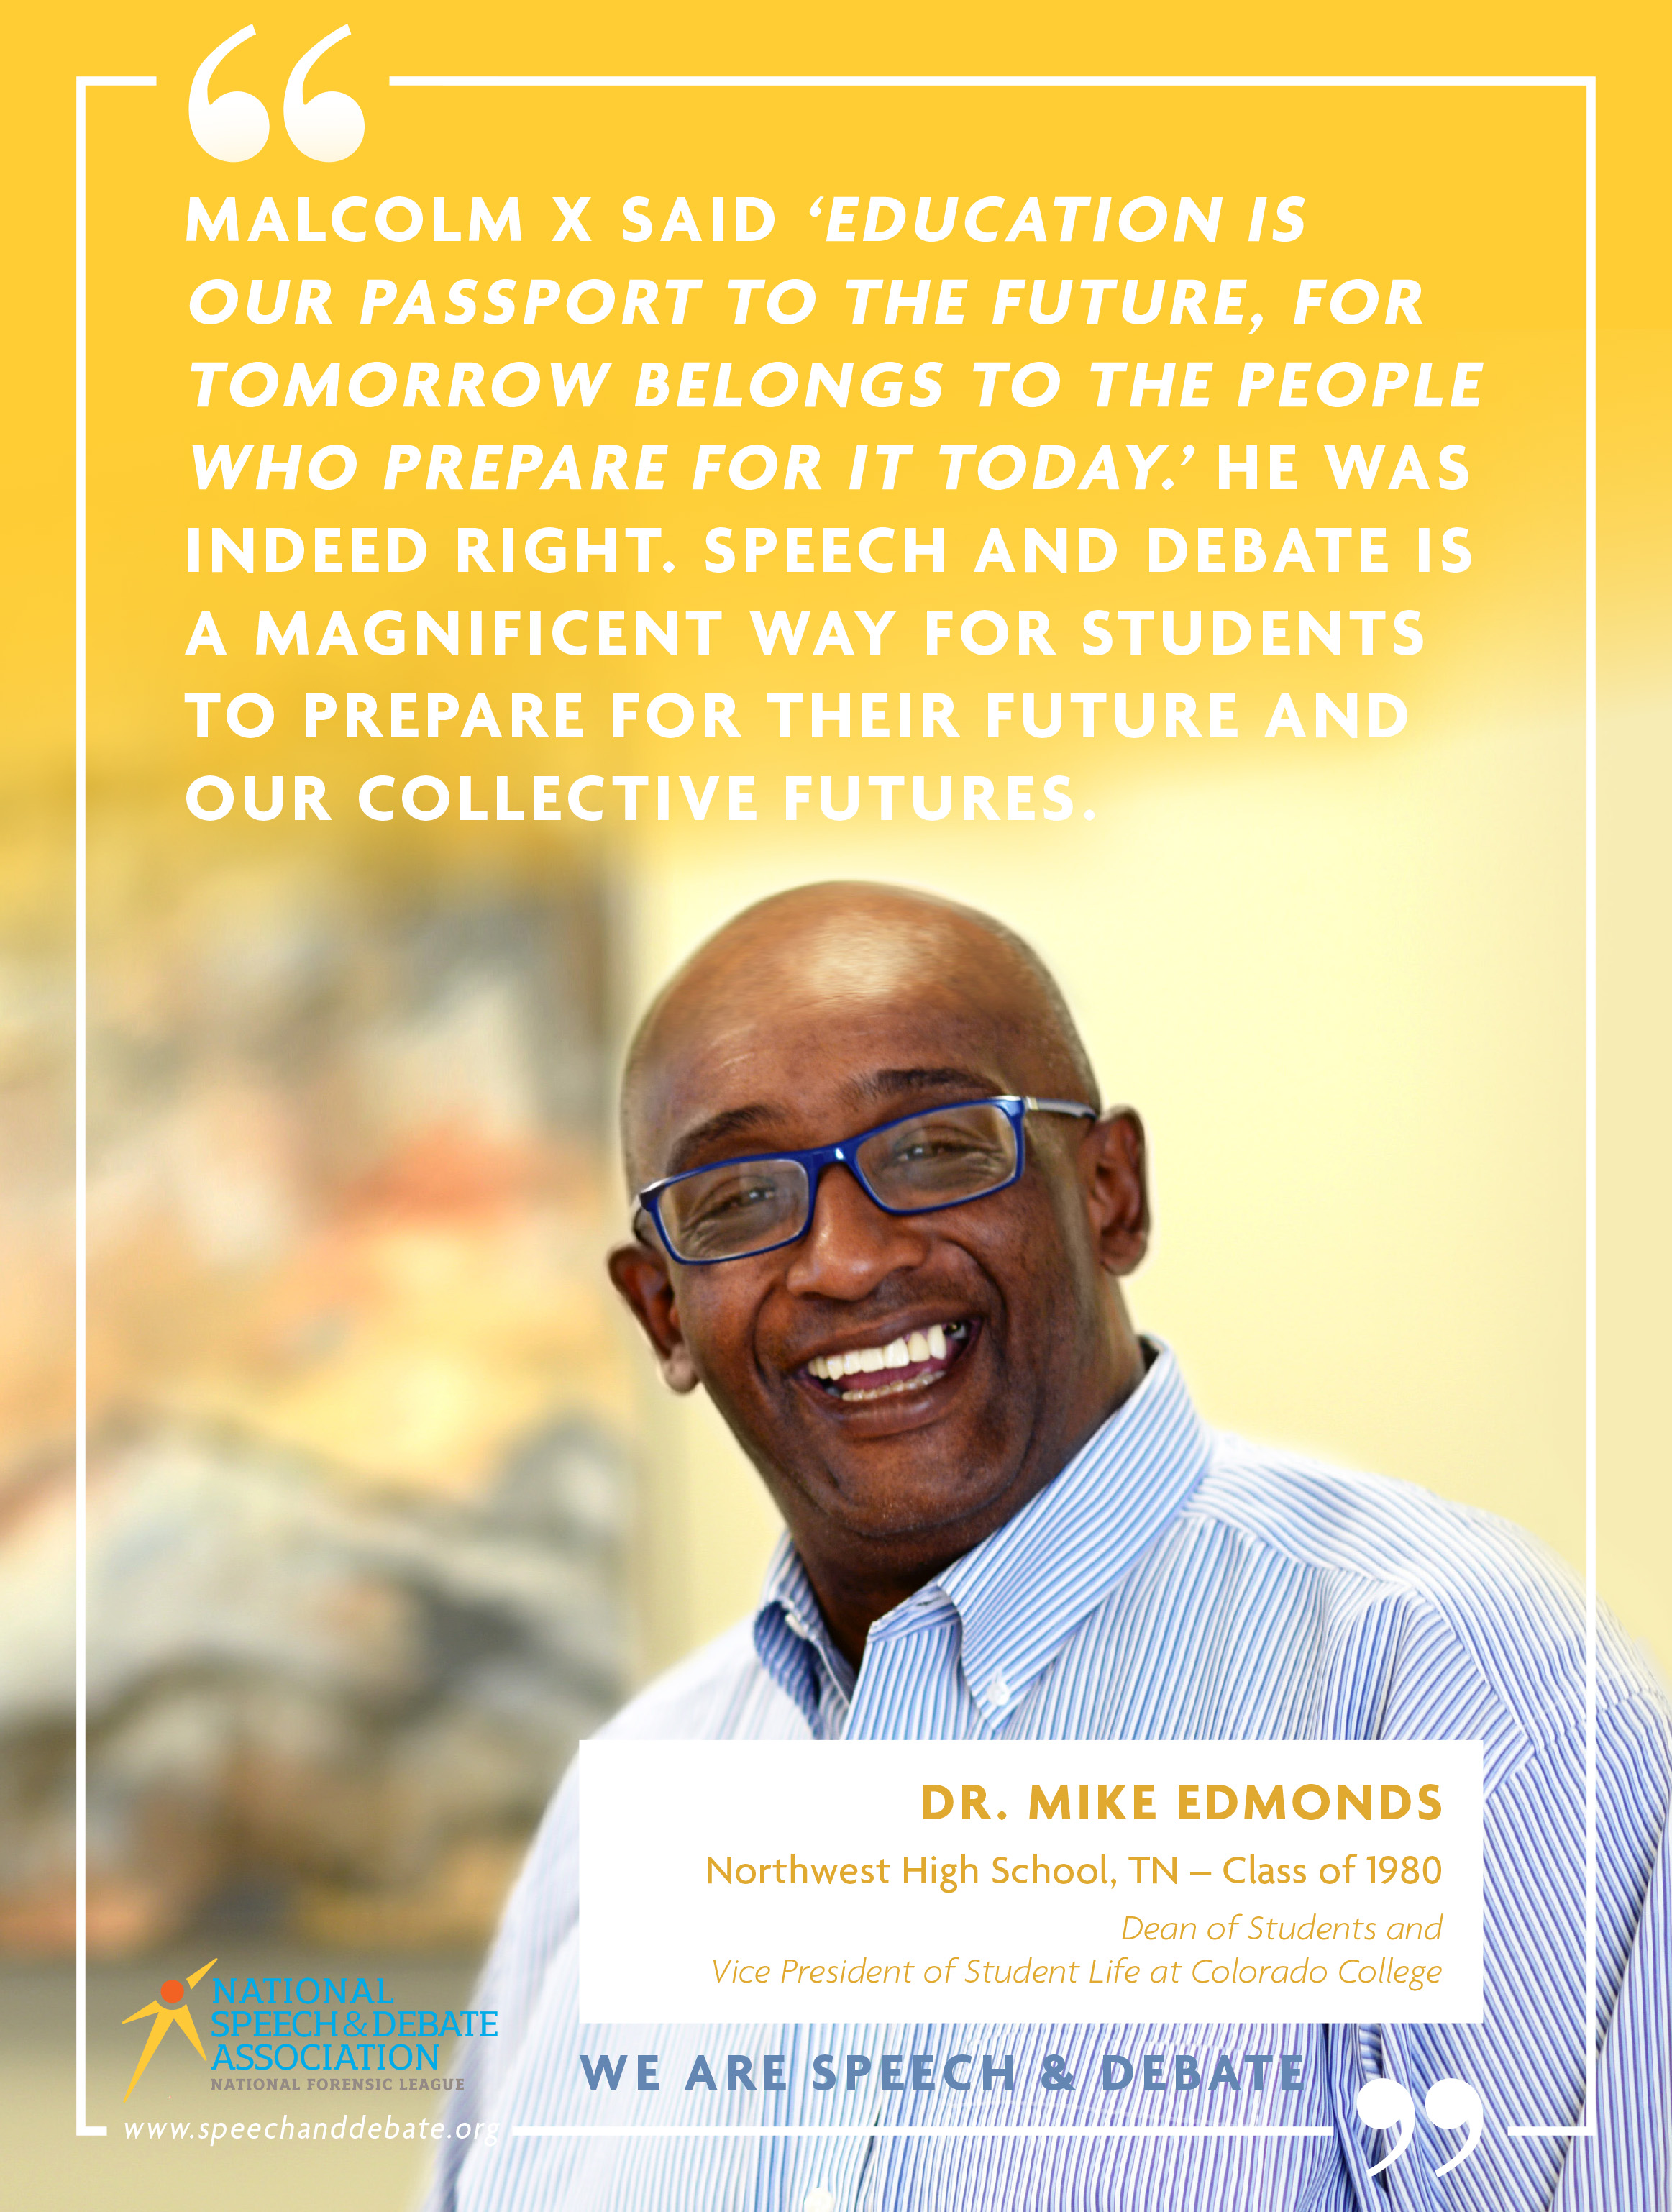 MALCOM X SAID ‘EDUCATION IS  OUR PASSPORT TO THE FUTURE, FOR TOMORROW BELONGS TO THE PEOPLE WHO PREPARE FOR IT TODAY.’ HE WAS INDEED RIGHT. SPEECH AND DEBATE IS A MAGNIFICENT WAY FOR STUDENTS TO PREPARE FOR THEIR FUTURE AND OUR COLLECTIVE FUTURES. - Dr. Mike Edmonds